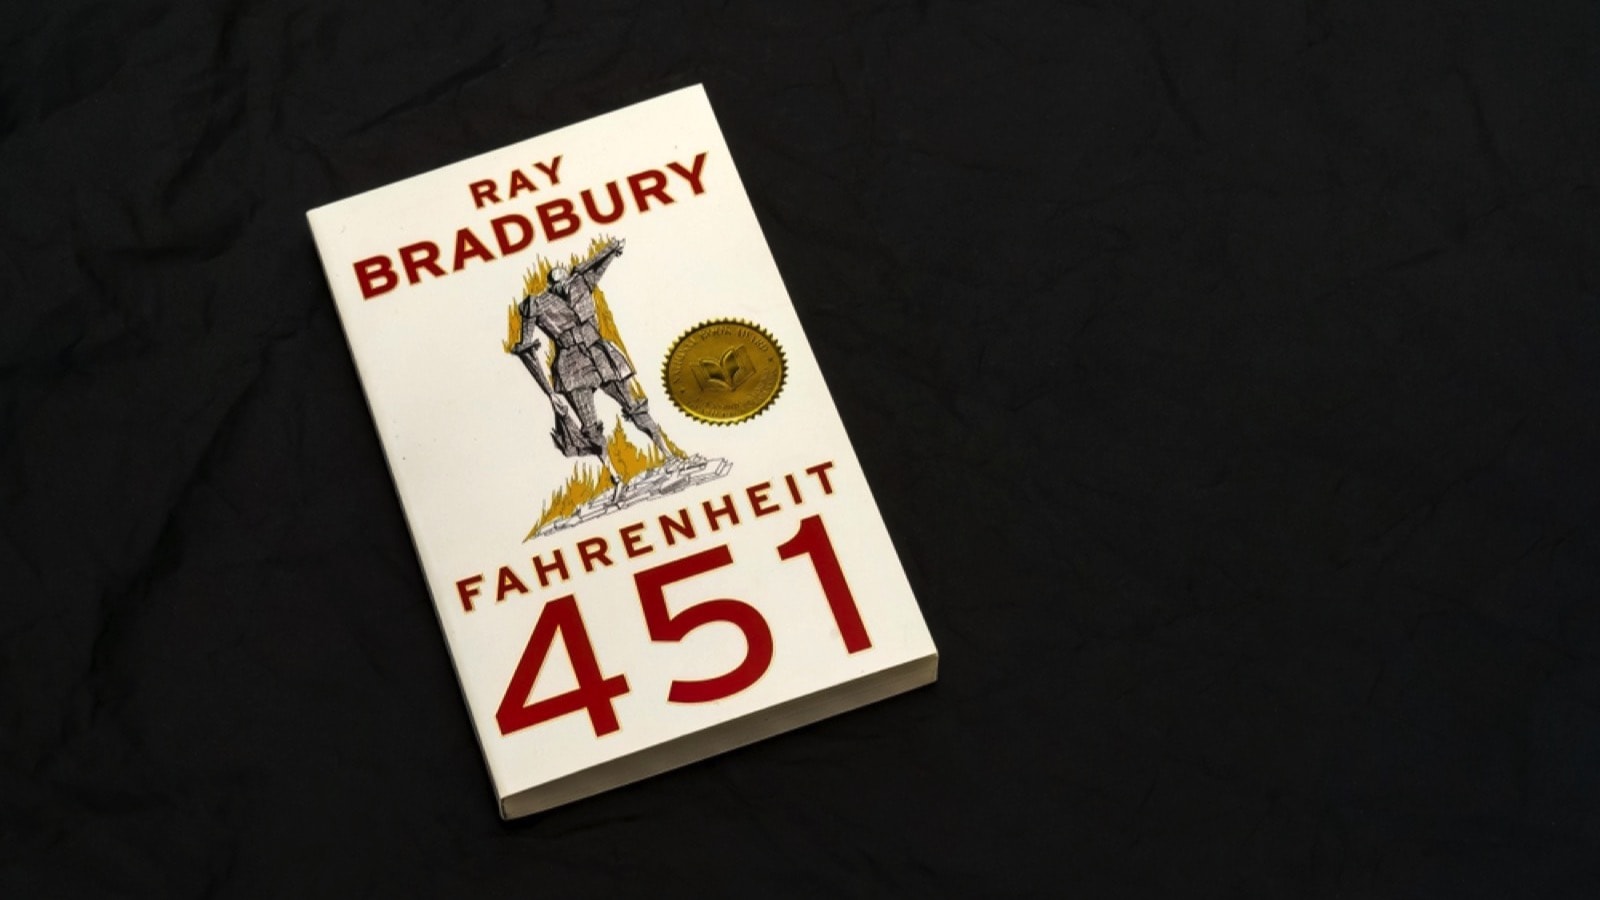 <p>A classical read like Fahrenheit 451 is always a great and safe choice when traveling. You will undoubtedly be drawn into its plotline, and the world around you will disappear. With a book like Fahrenheit 451, you might even attract other readers in the wild to come up to you and discuss the book at hand. This title features a dystopian world where books have been banned and outlawed. Any books found will be burned by “firemen. “The protagonist is a fireman caught between his personal beliefs and duty to the government.</p>